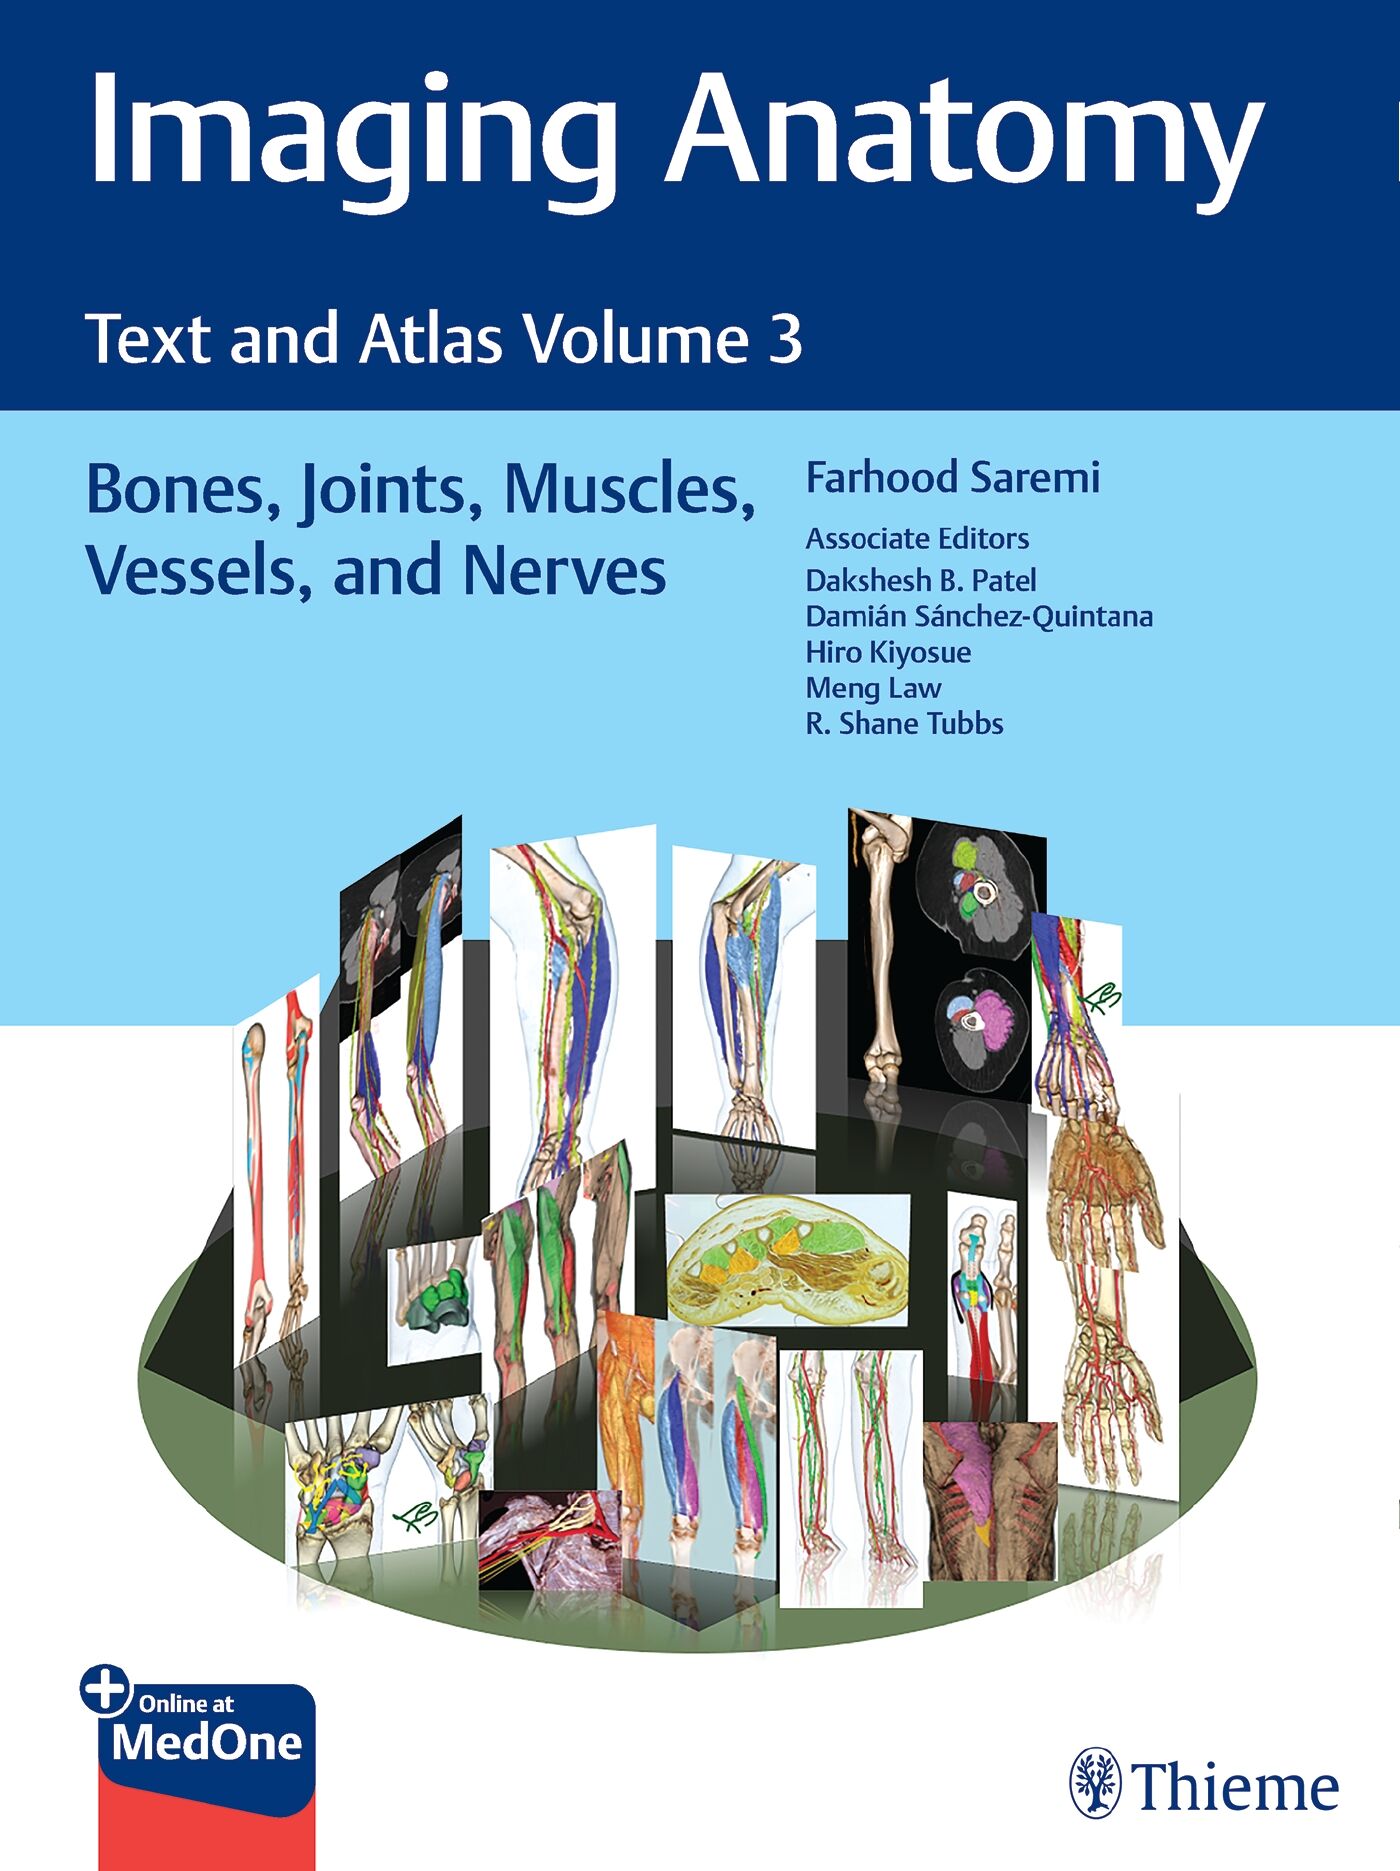 Imaging Anatomy: Text and Atlas Volume 3, 9781626239852